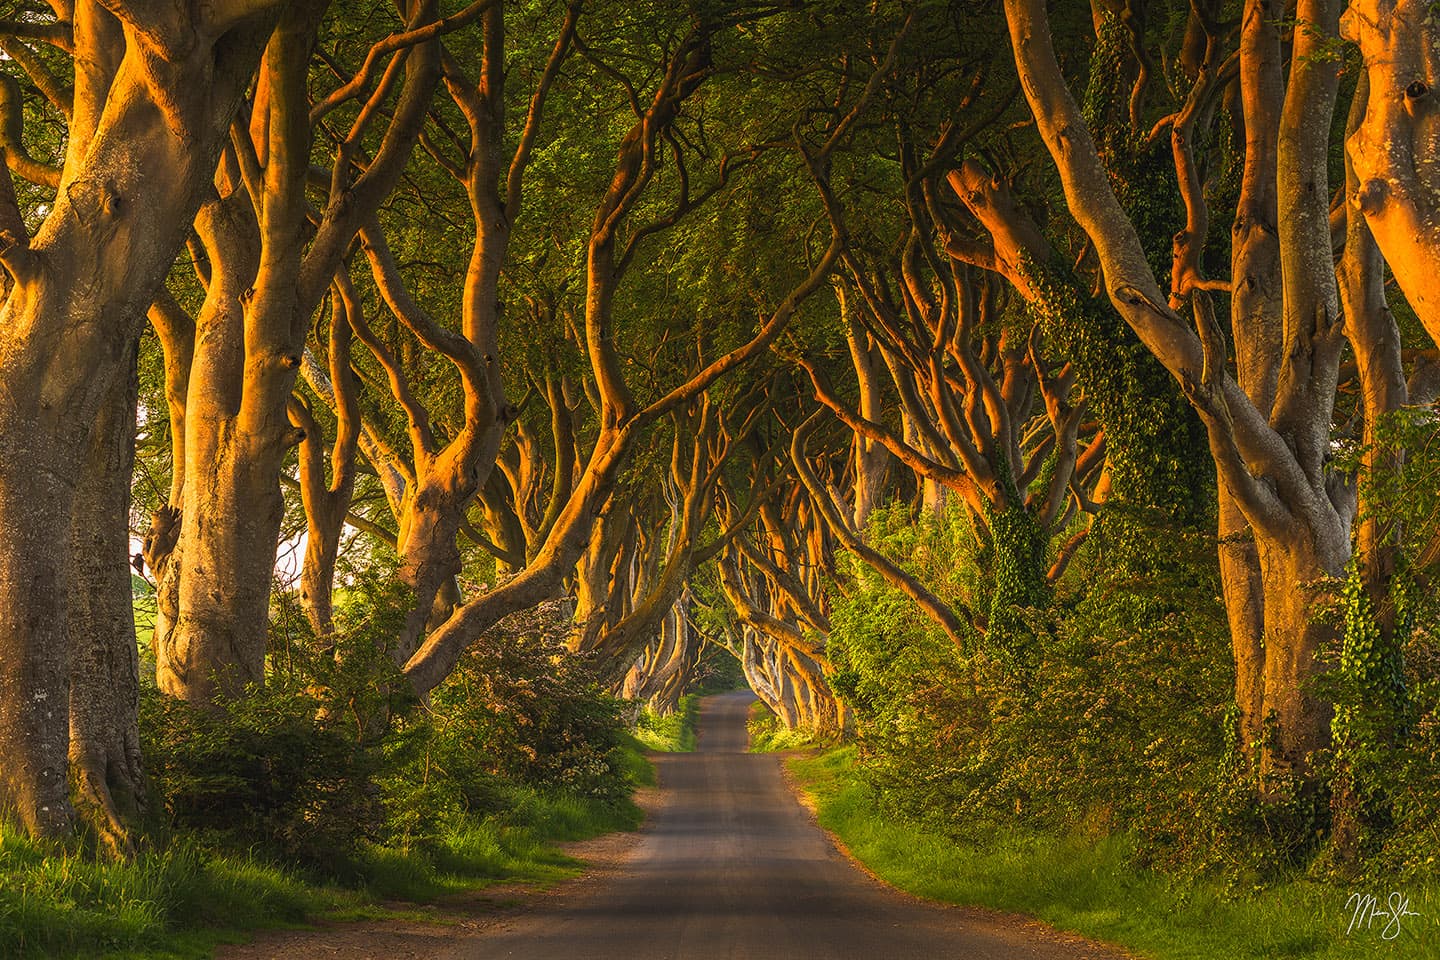 Morning at the Dark Hedges - The Dark Hedges, County Antrim, Northern Ireland